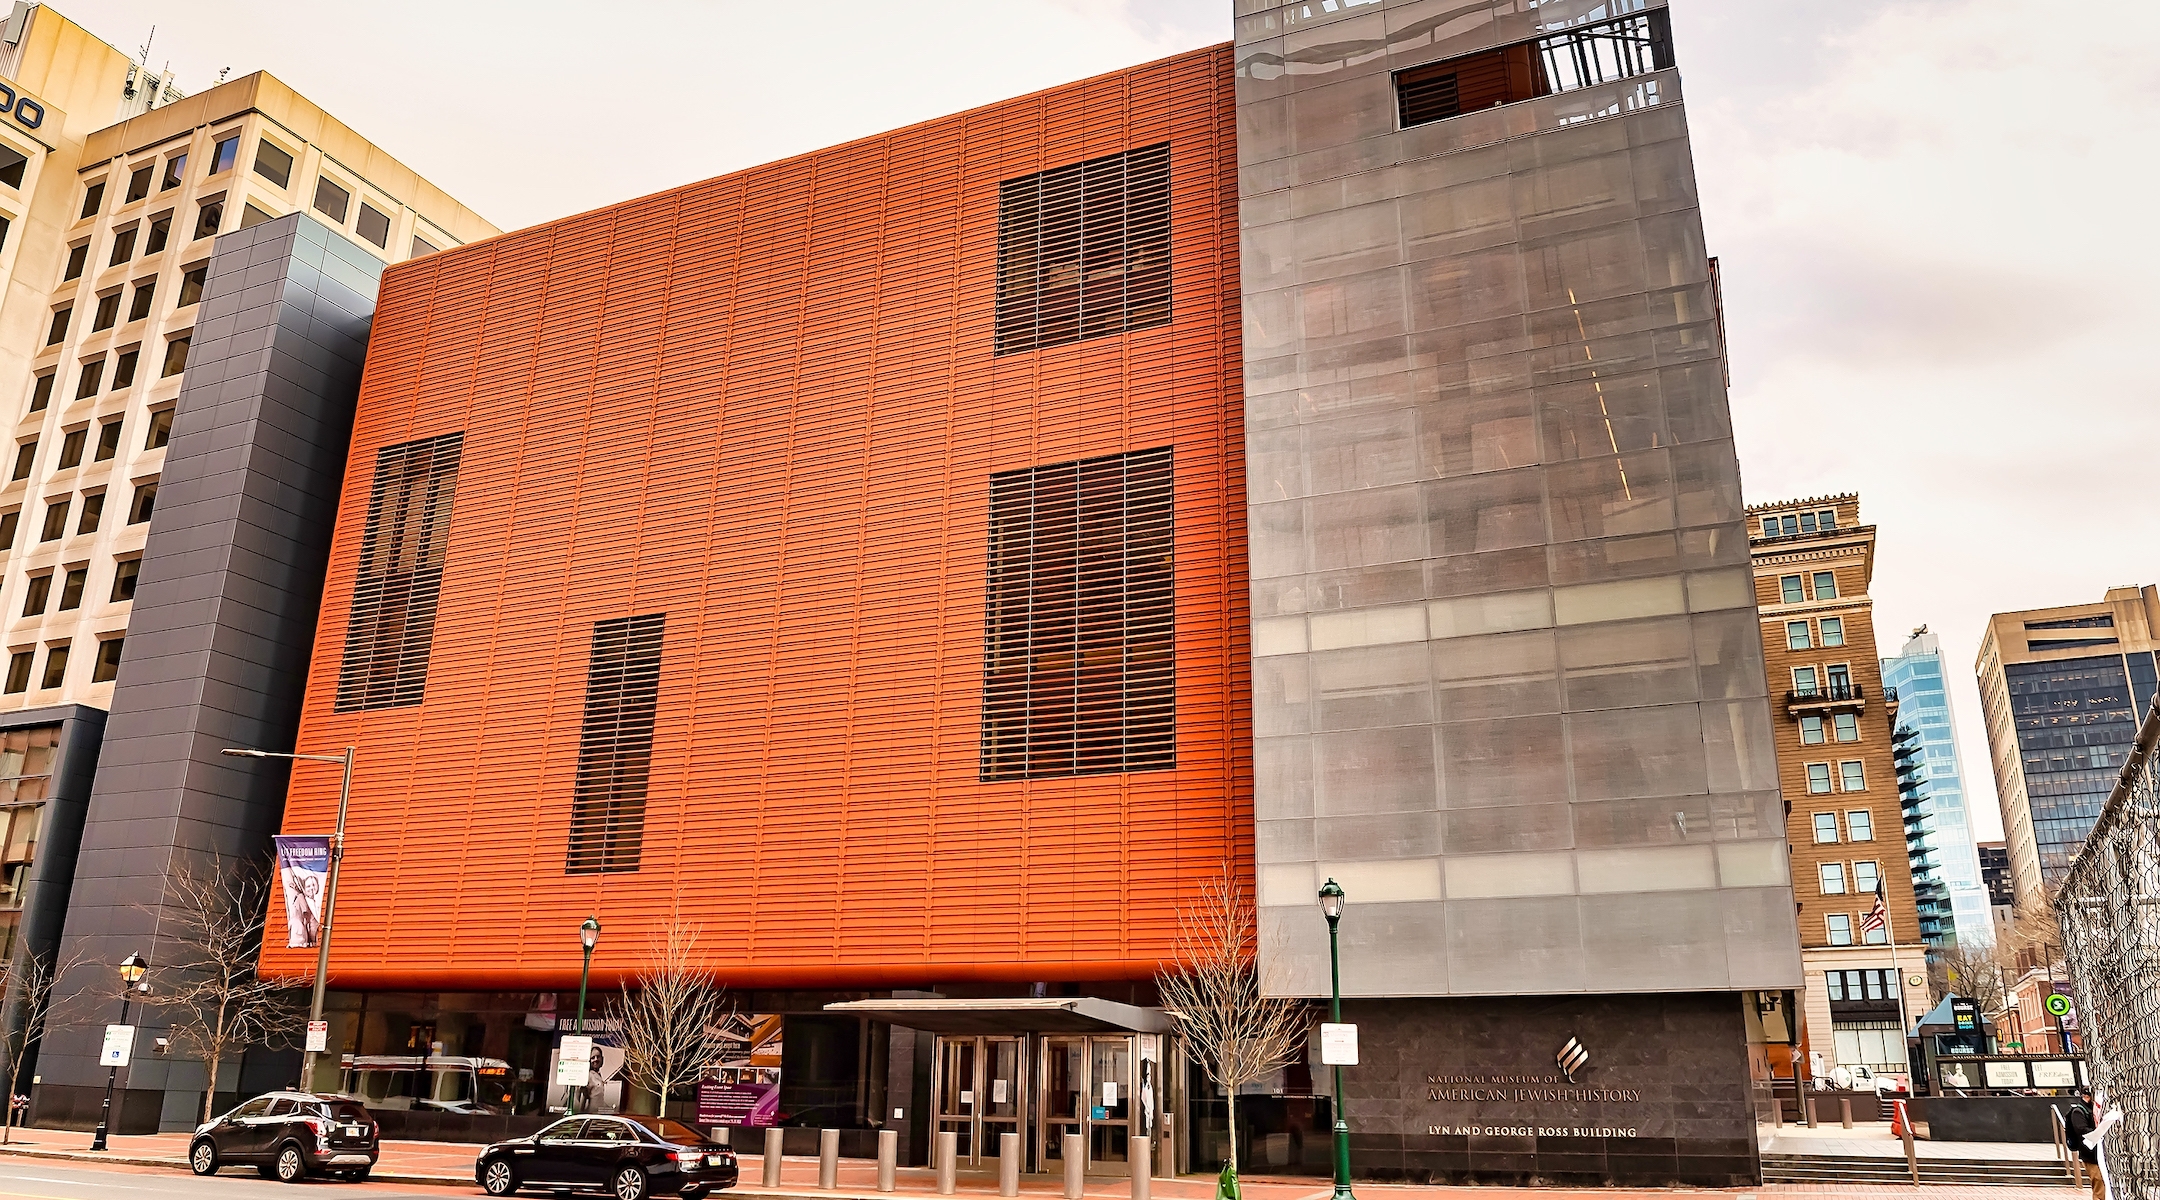 A view of the National Museum of American Jewish History in Philadelphia, March 17, 2020. (Gilbert Carrasquillo/Getty Images)